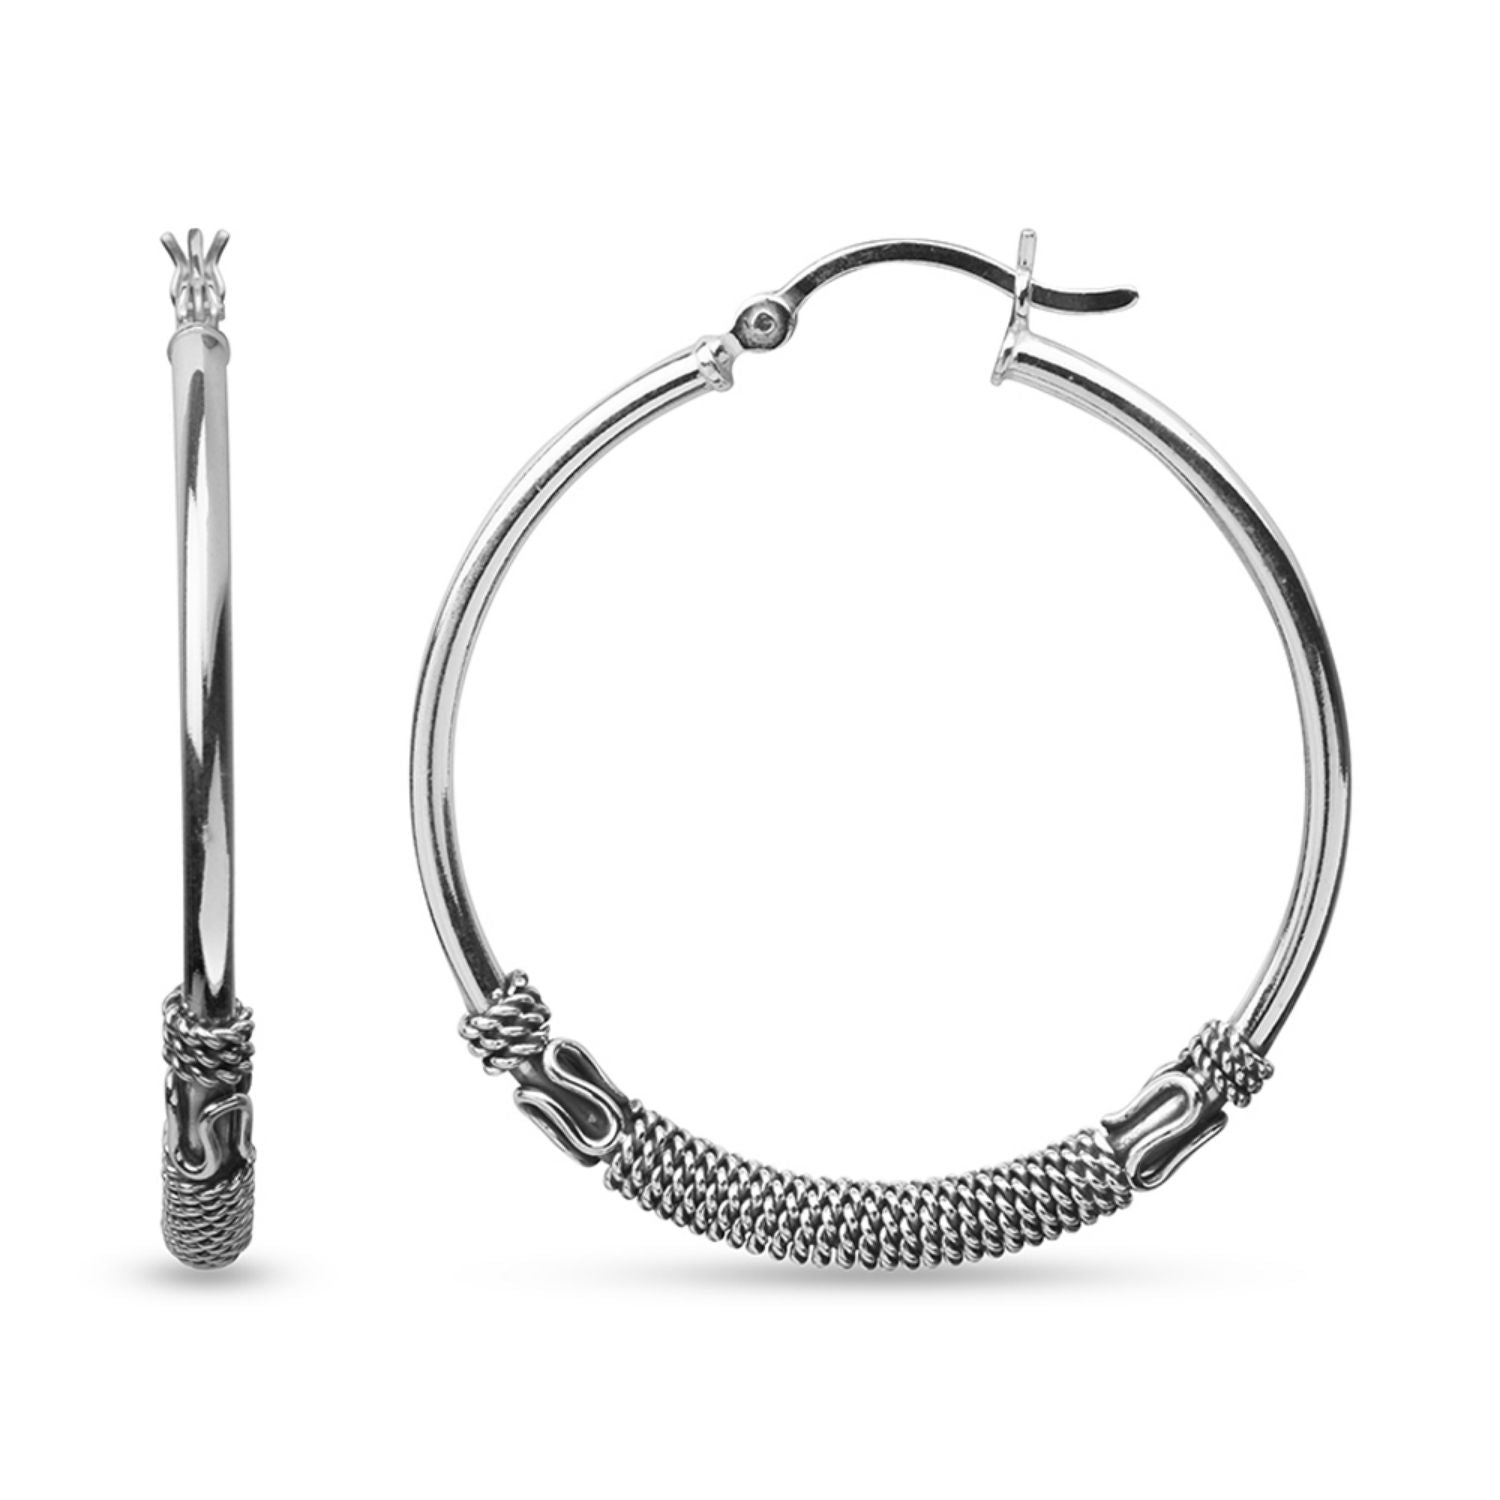 925 Sterling Silver Jewellery Light-Weight Antique Balinese Click-Top Hoop Earrings for Women